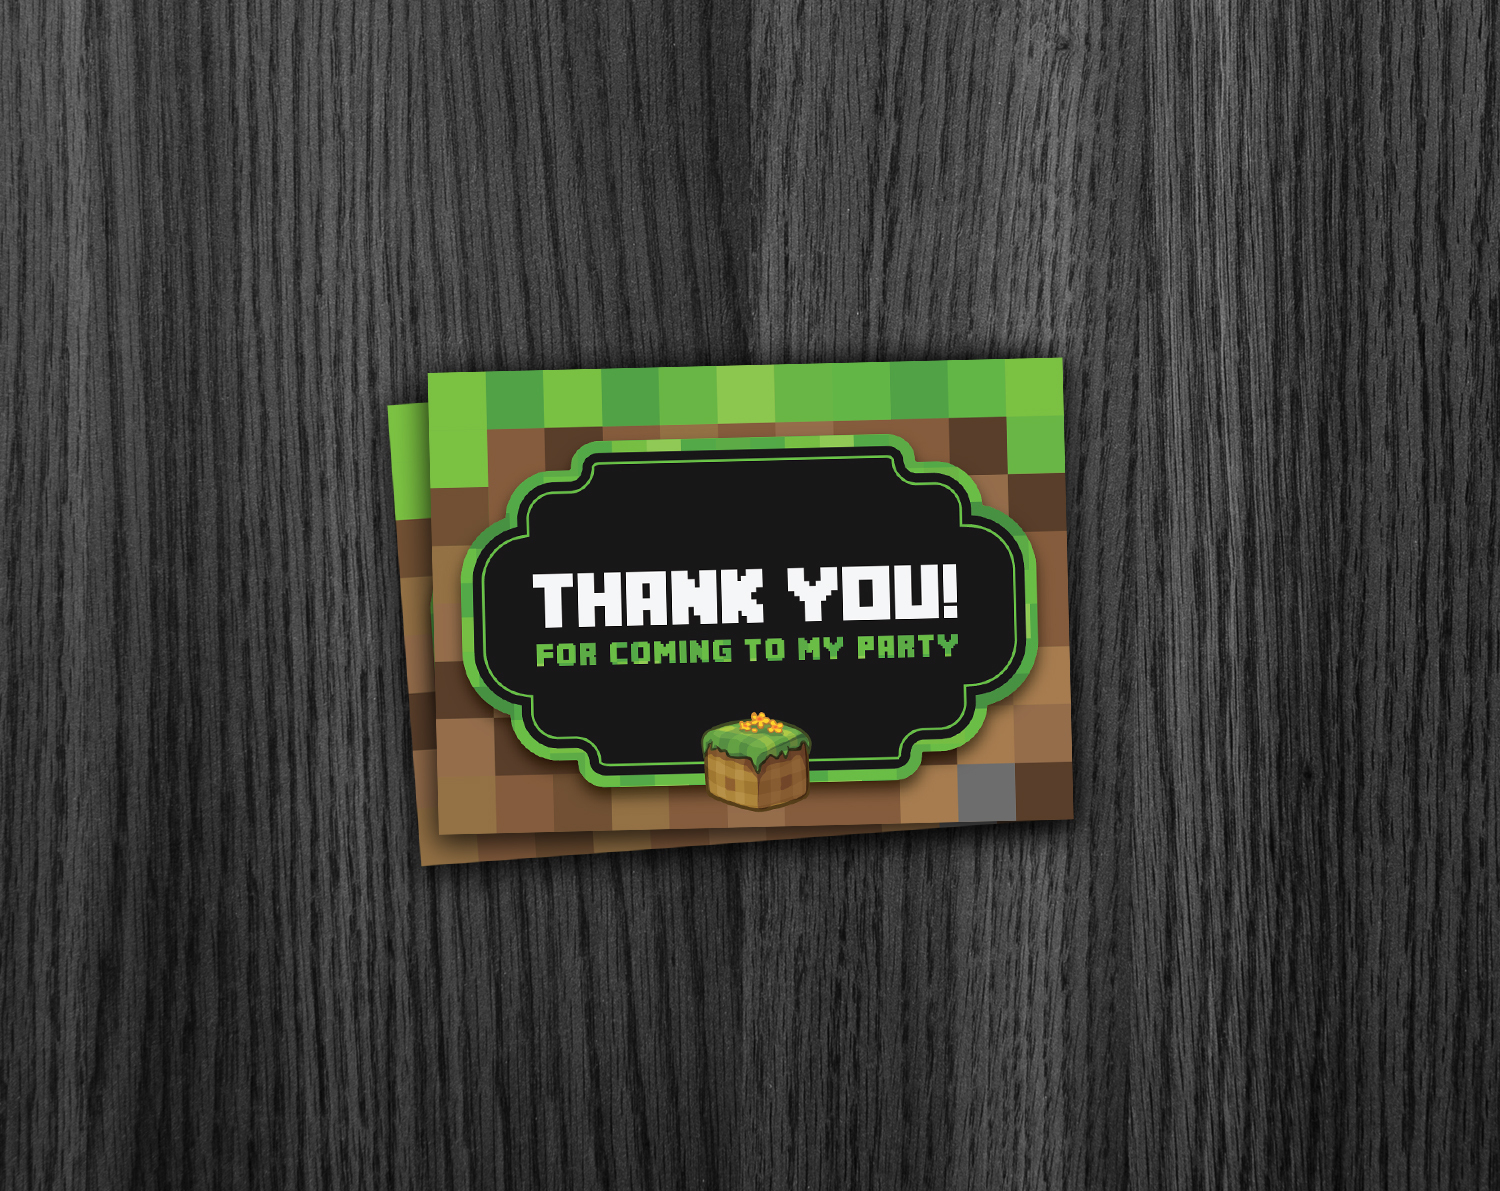 Free Printable Minecraft Thank You Notes | Download Them Or Print - Free Printable Minecraft Thank You Notes